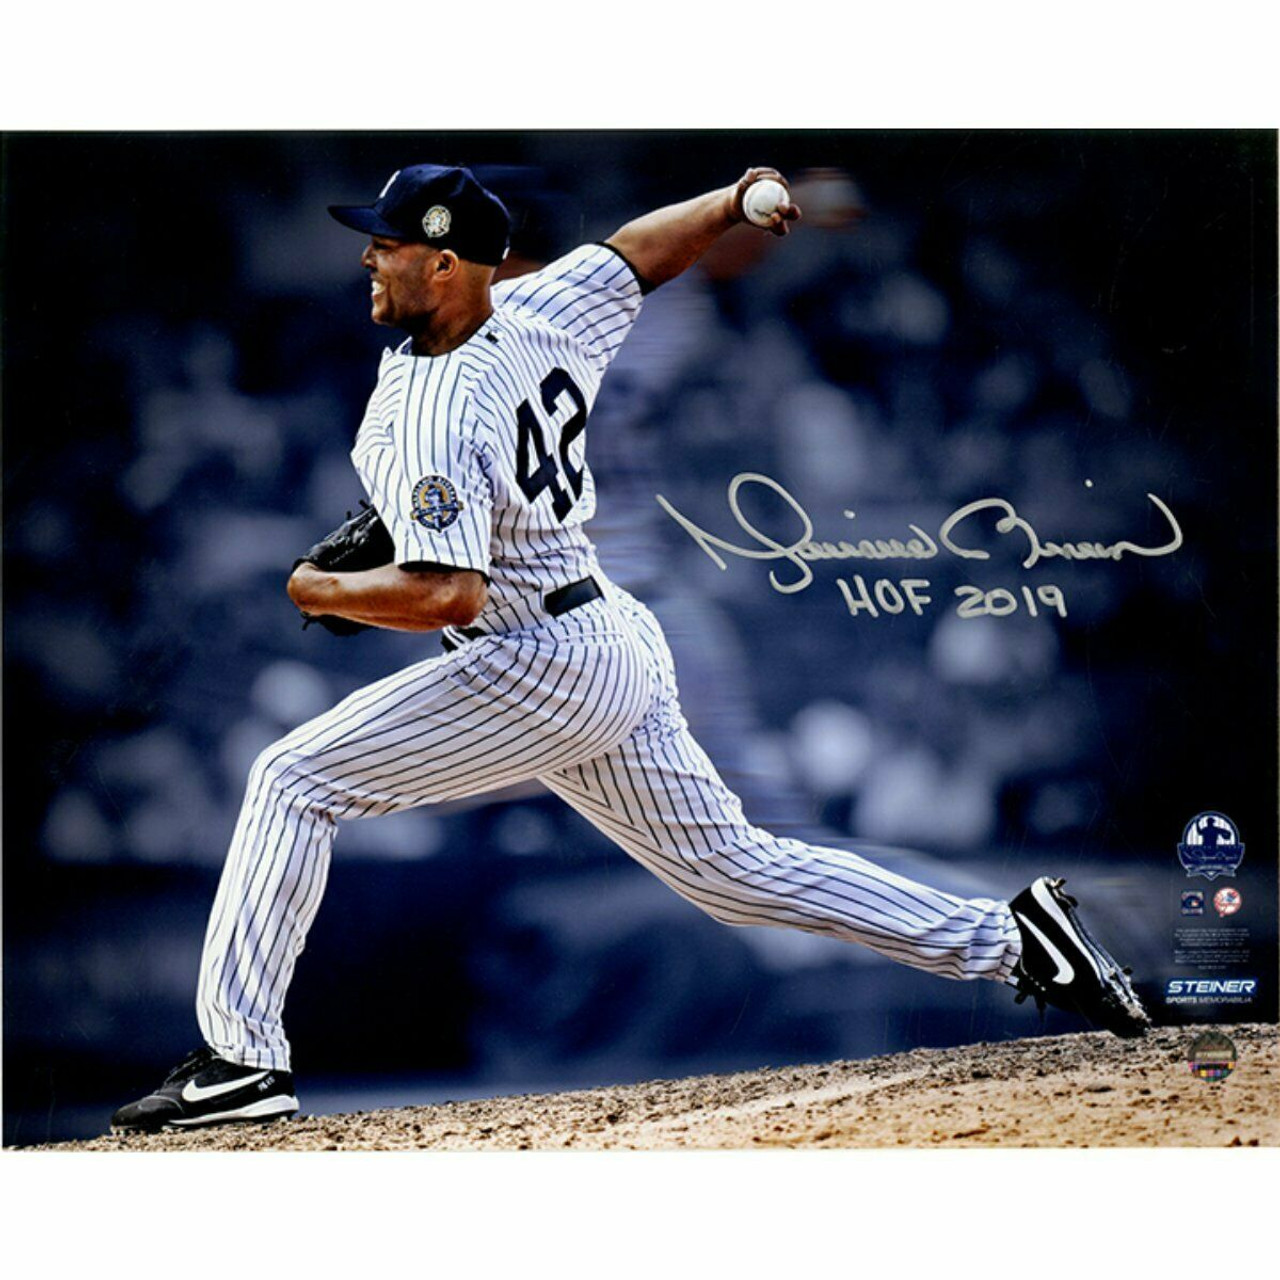 MARIANO RIVERA New York Yankees Autographed / Inscribed HOF 2019